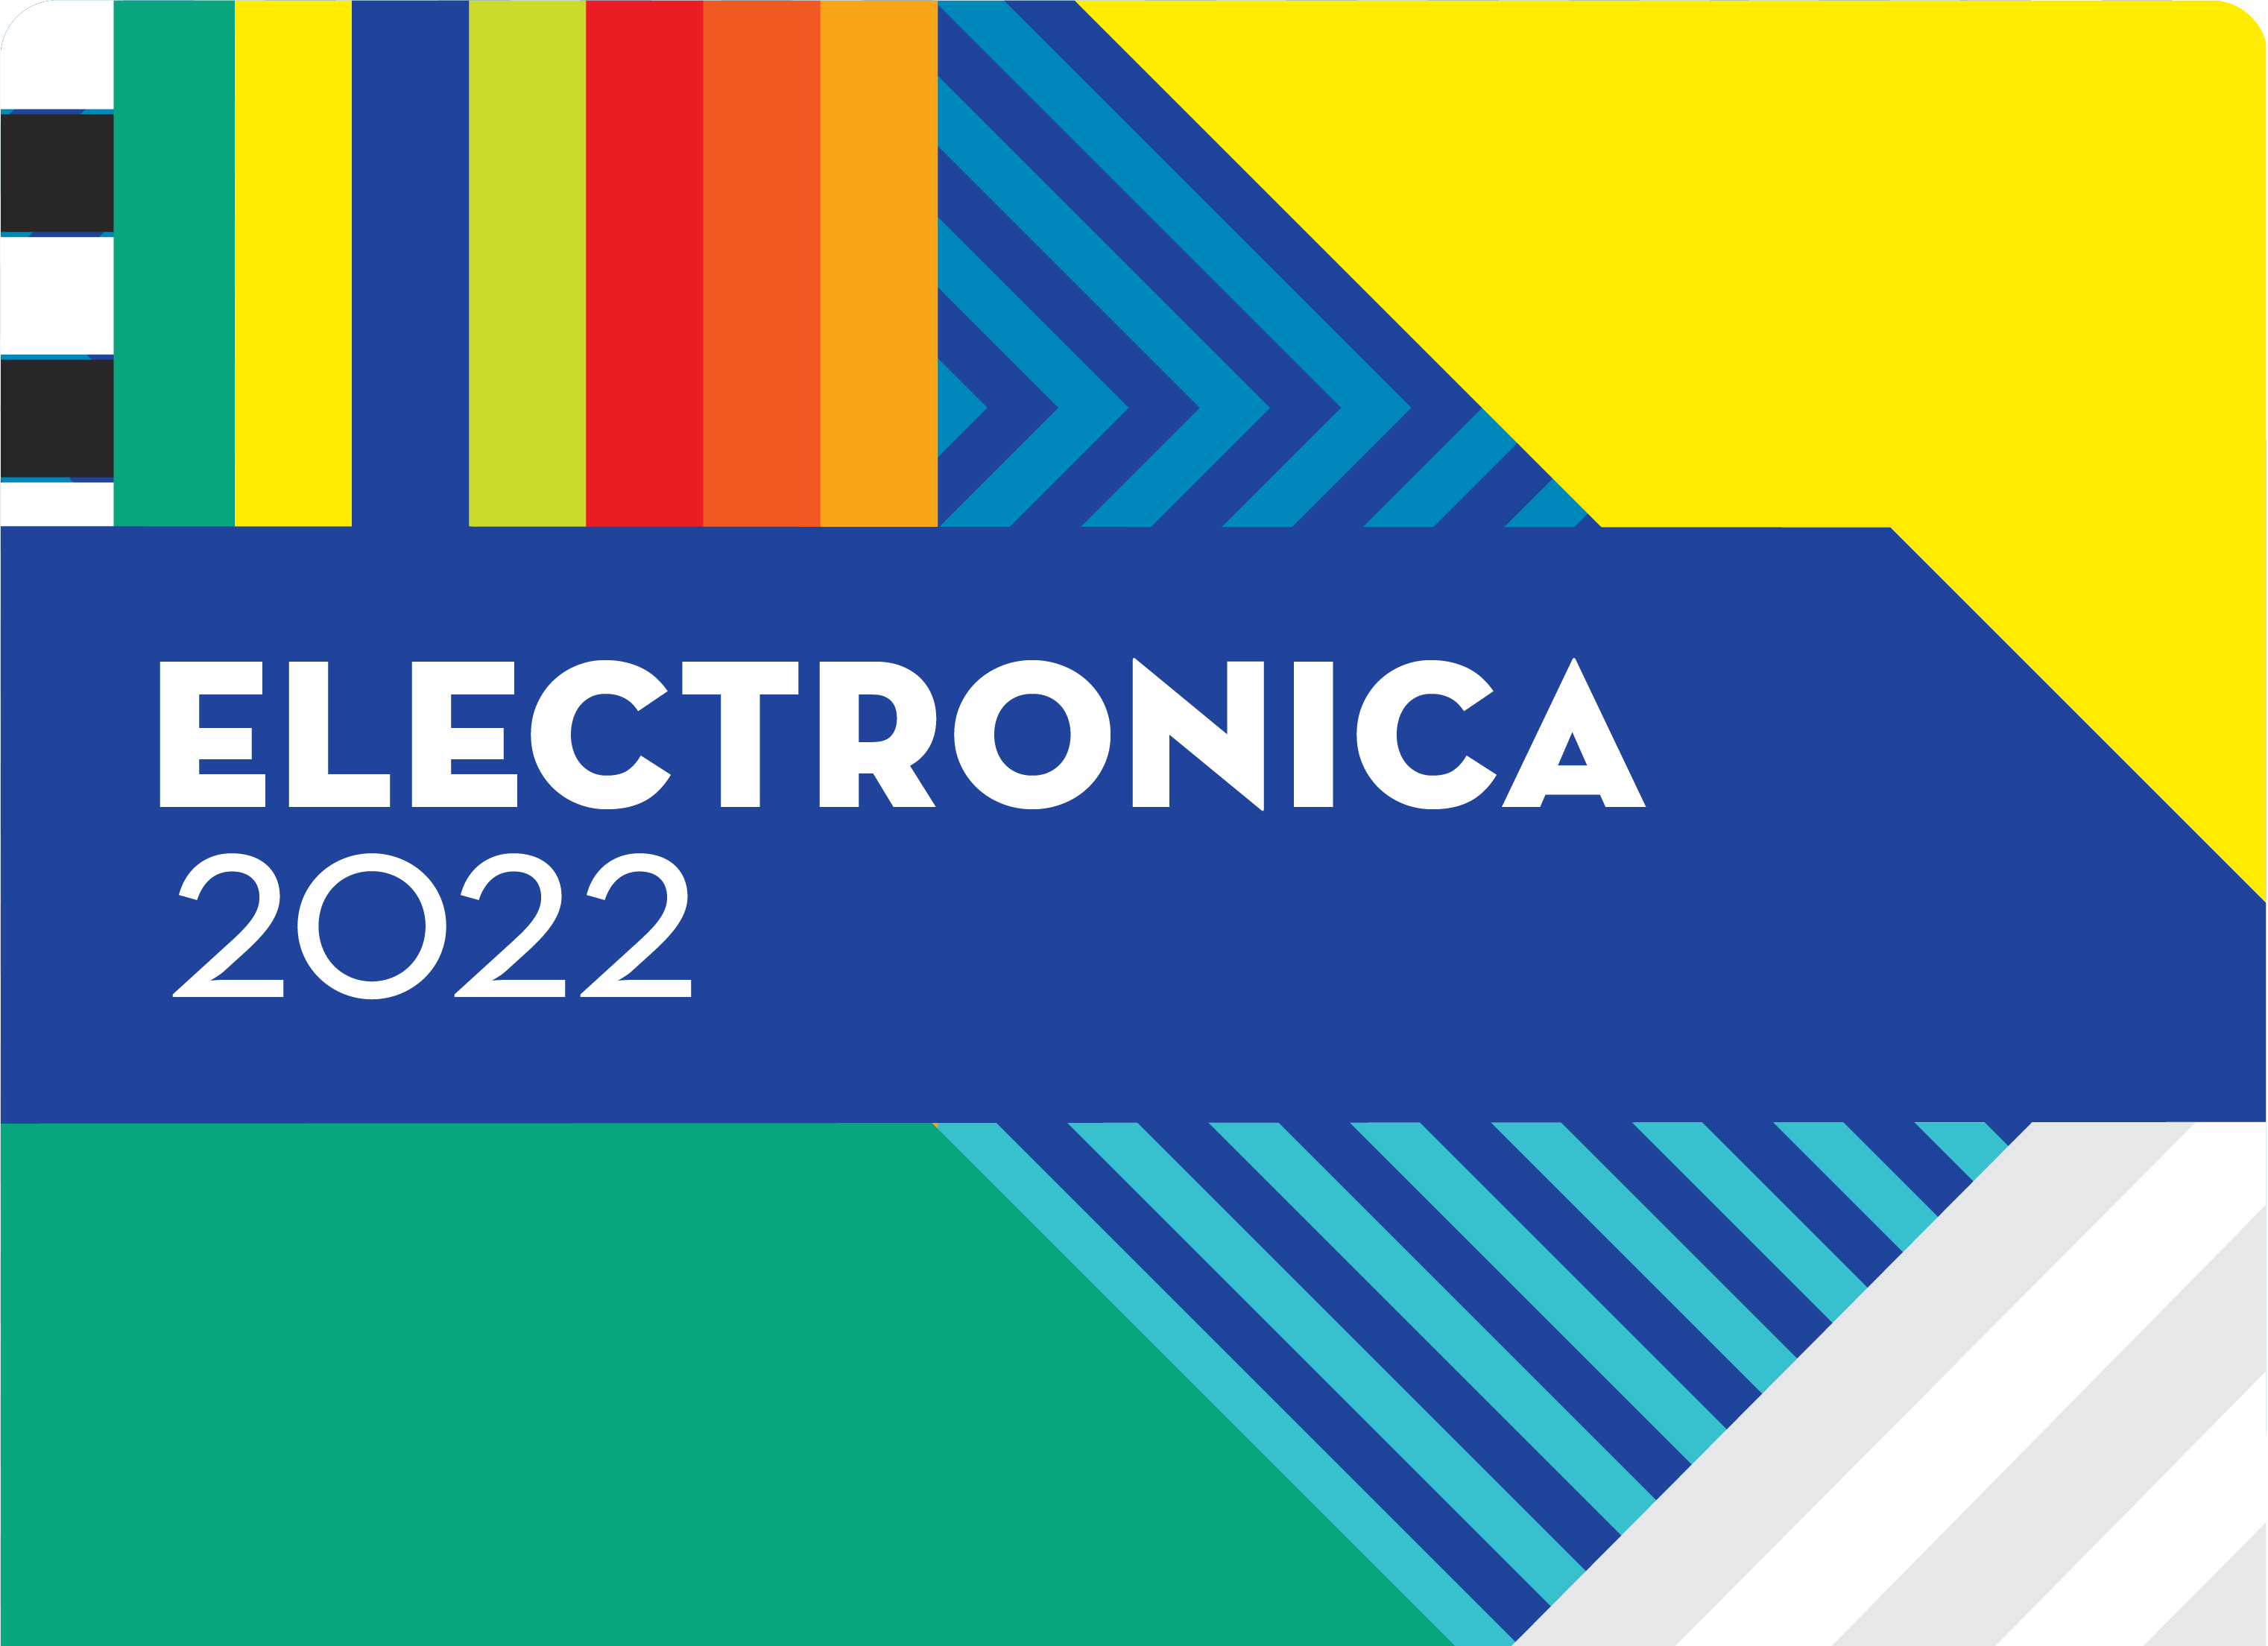 Technology That Brings People Together at Electronica